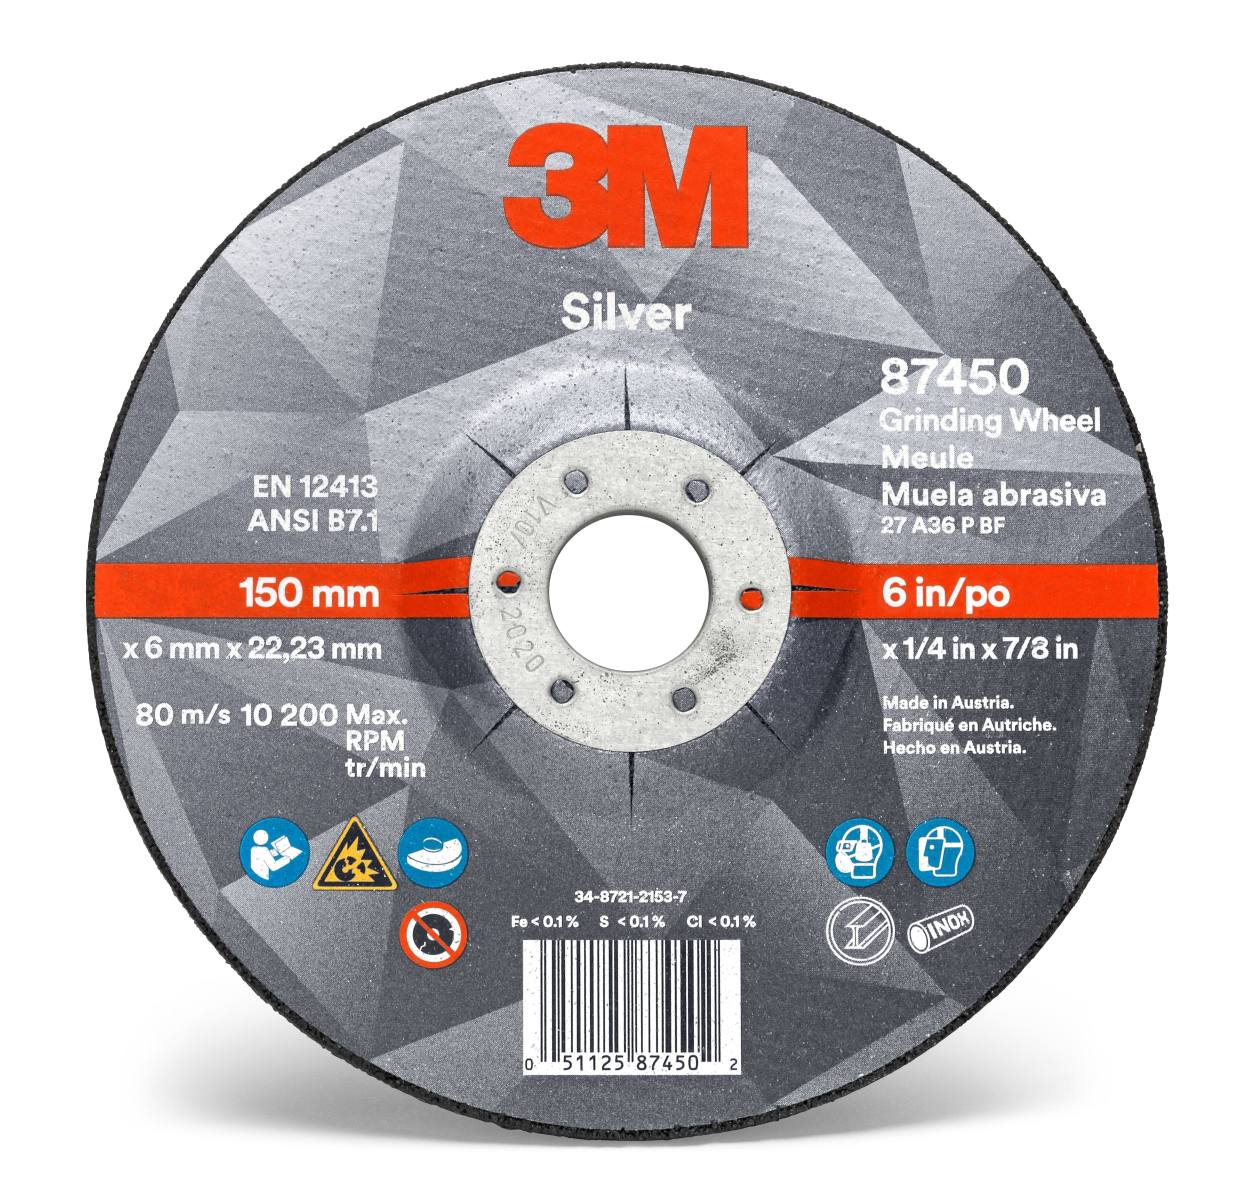 3M Silver grinding disc, 230 mm, 7.0 mm, 22.23 mm, type 27